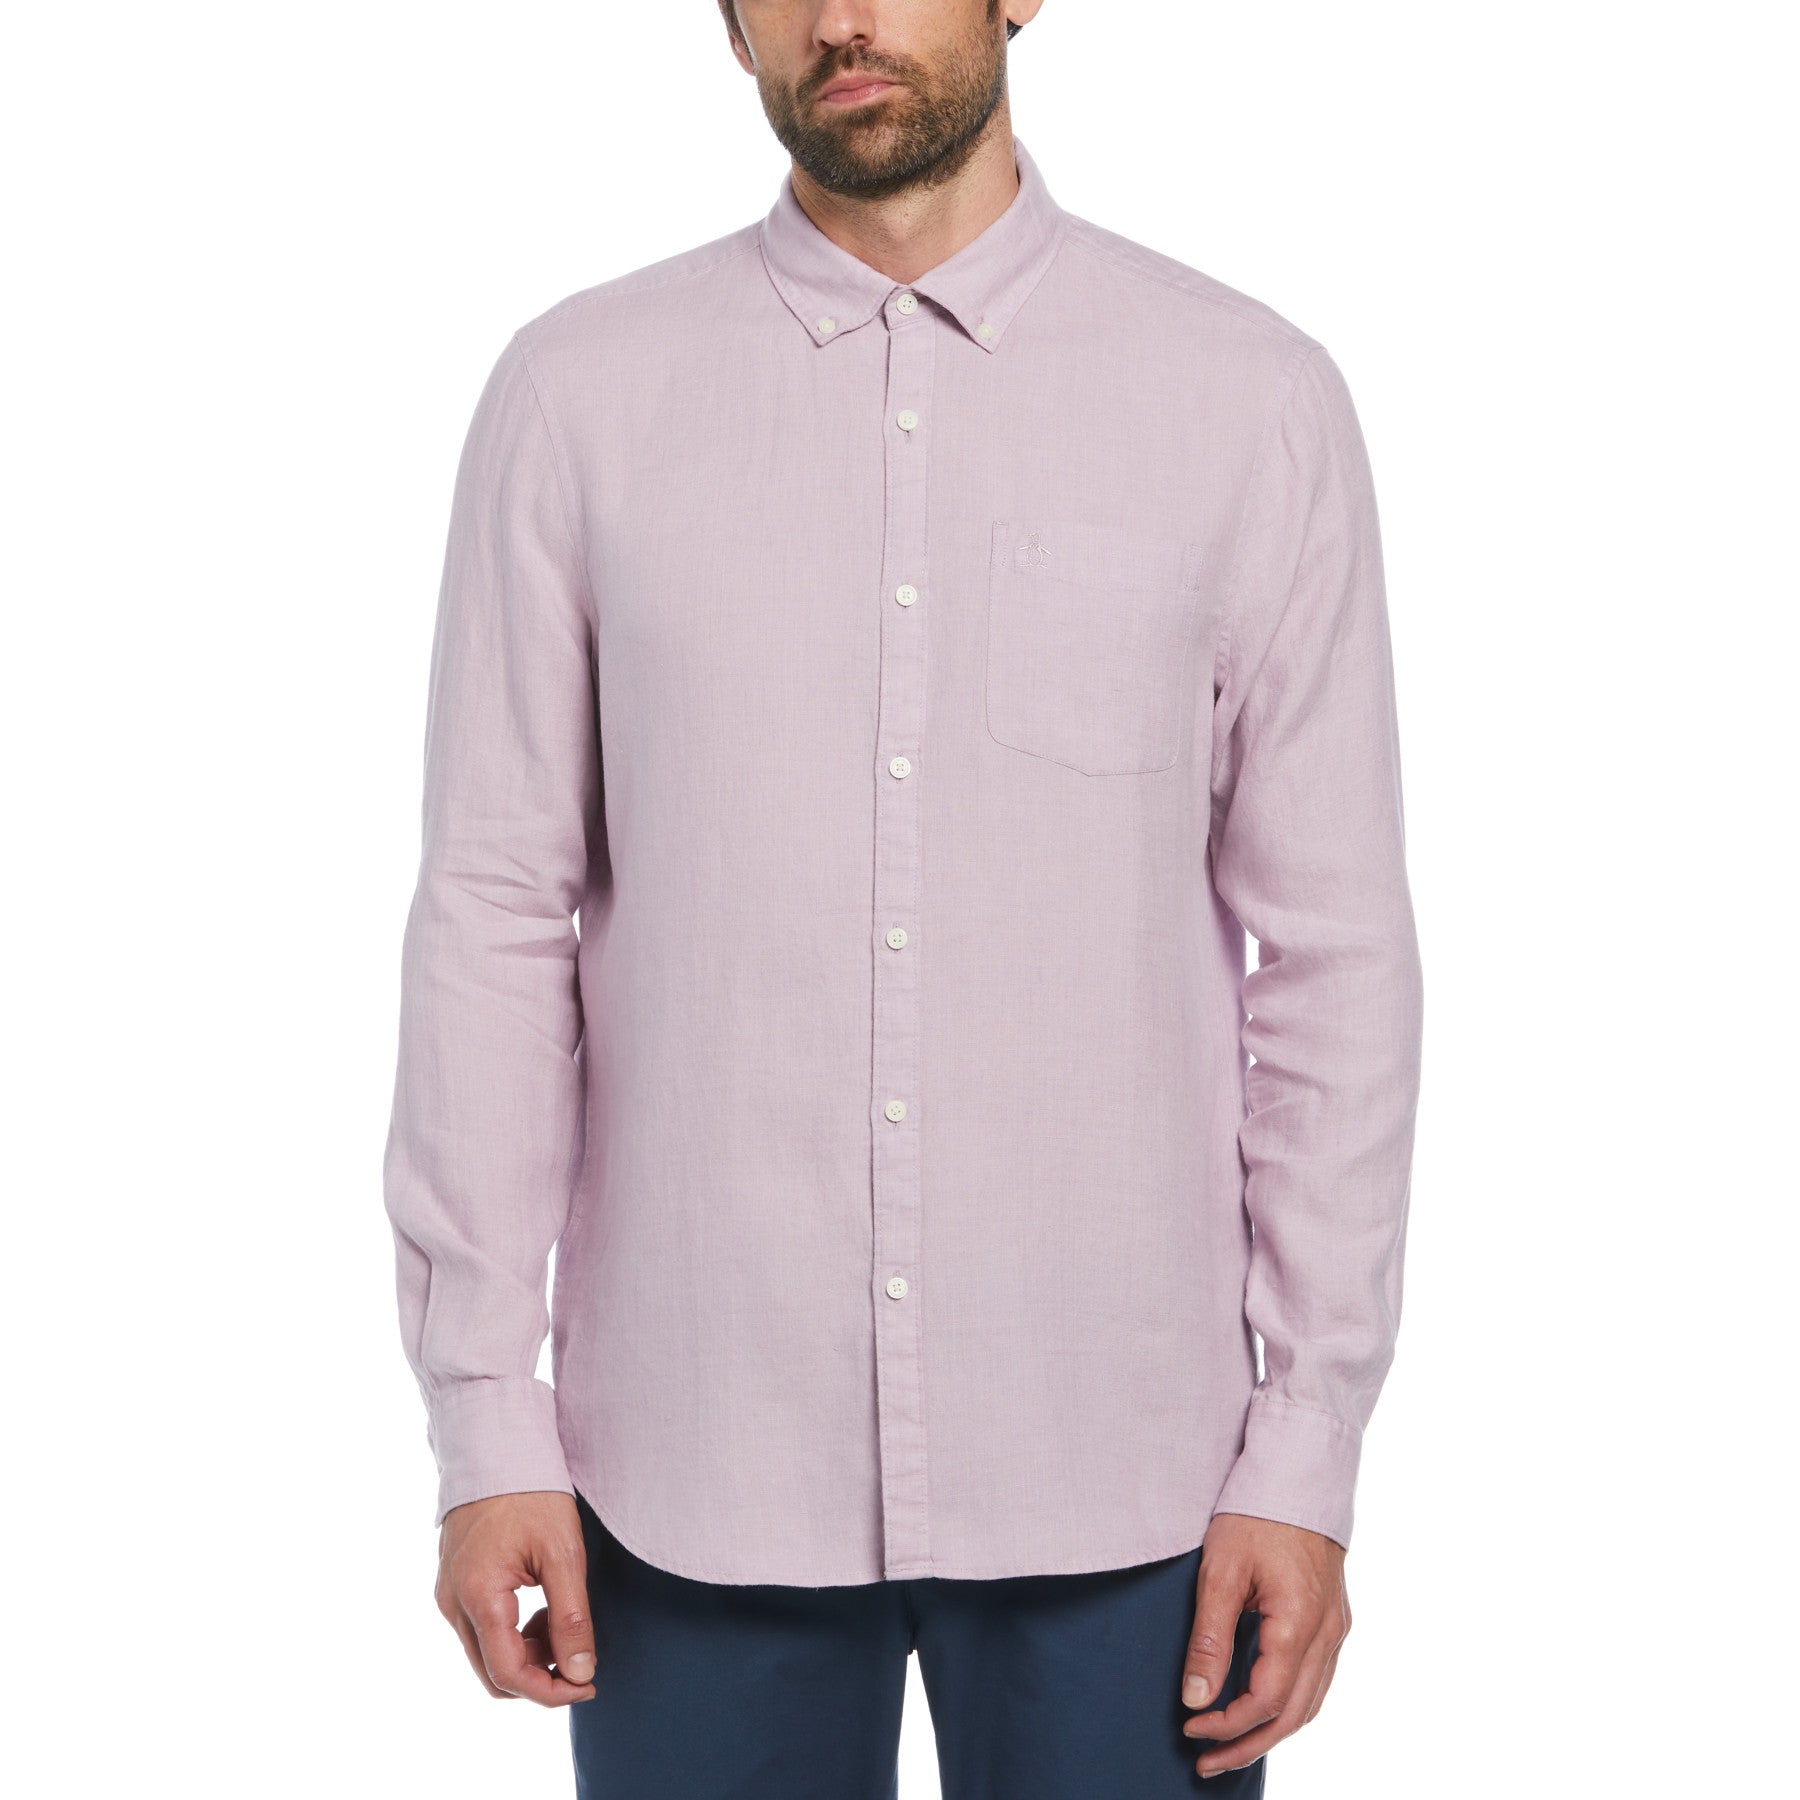 View Delave Linen Long Sleeve ButtonDown Shirt In Lavender Frost information